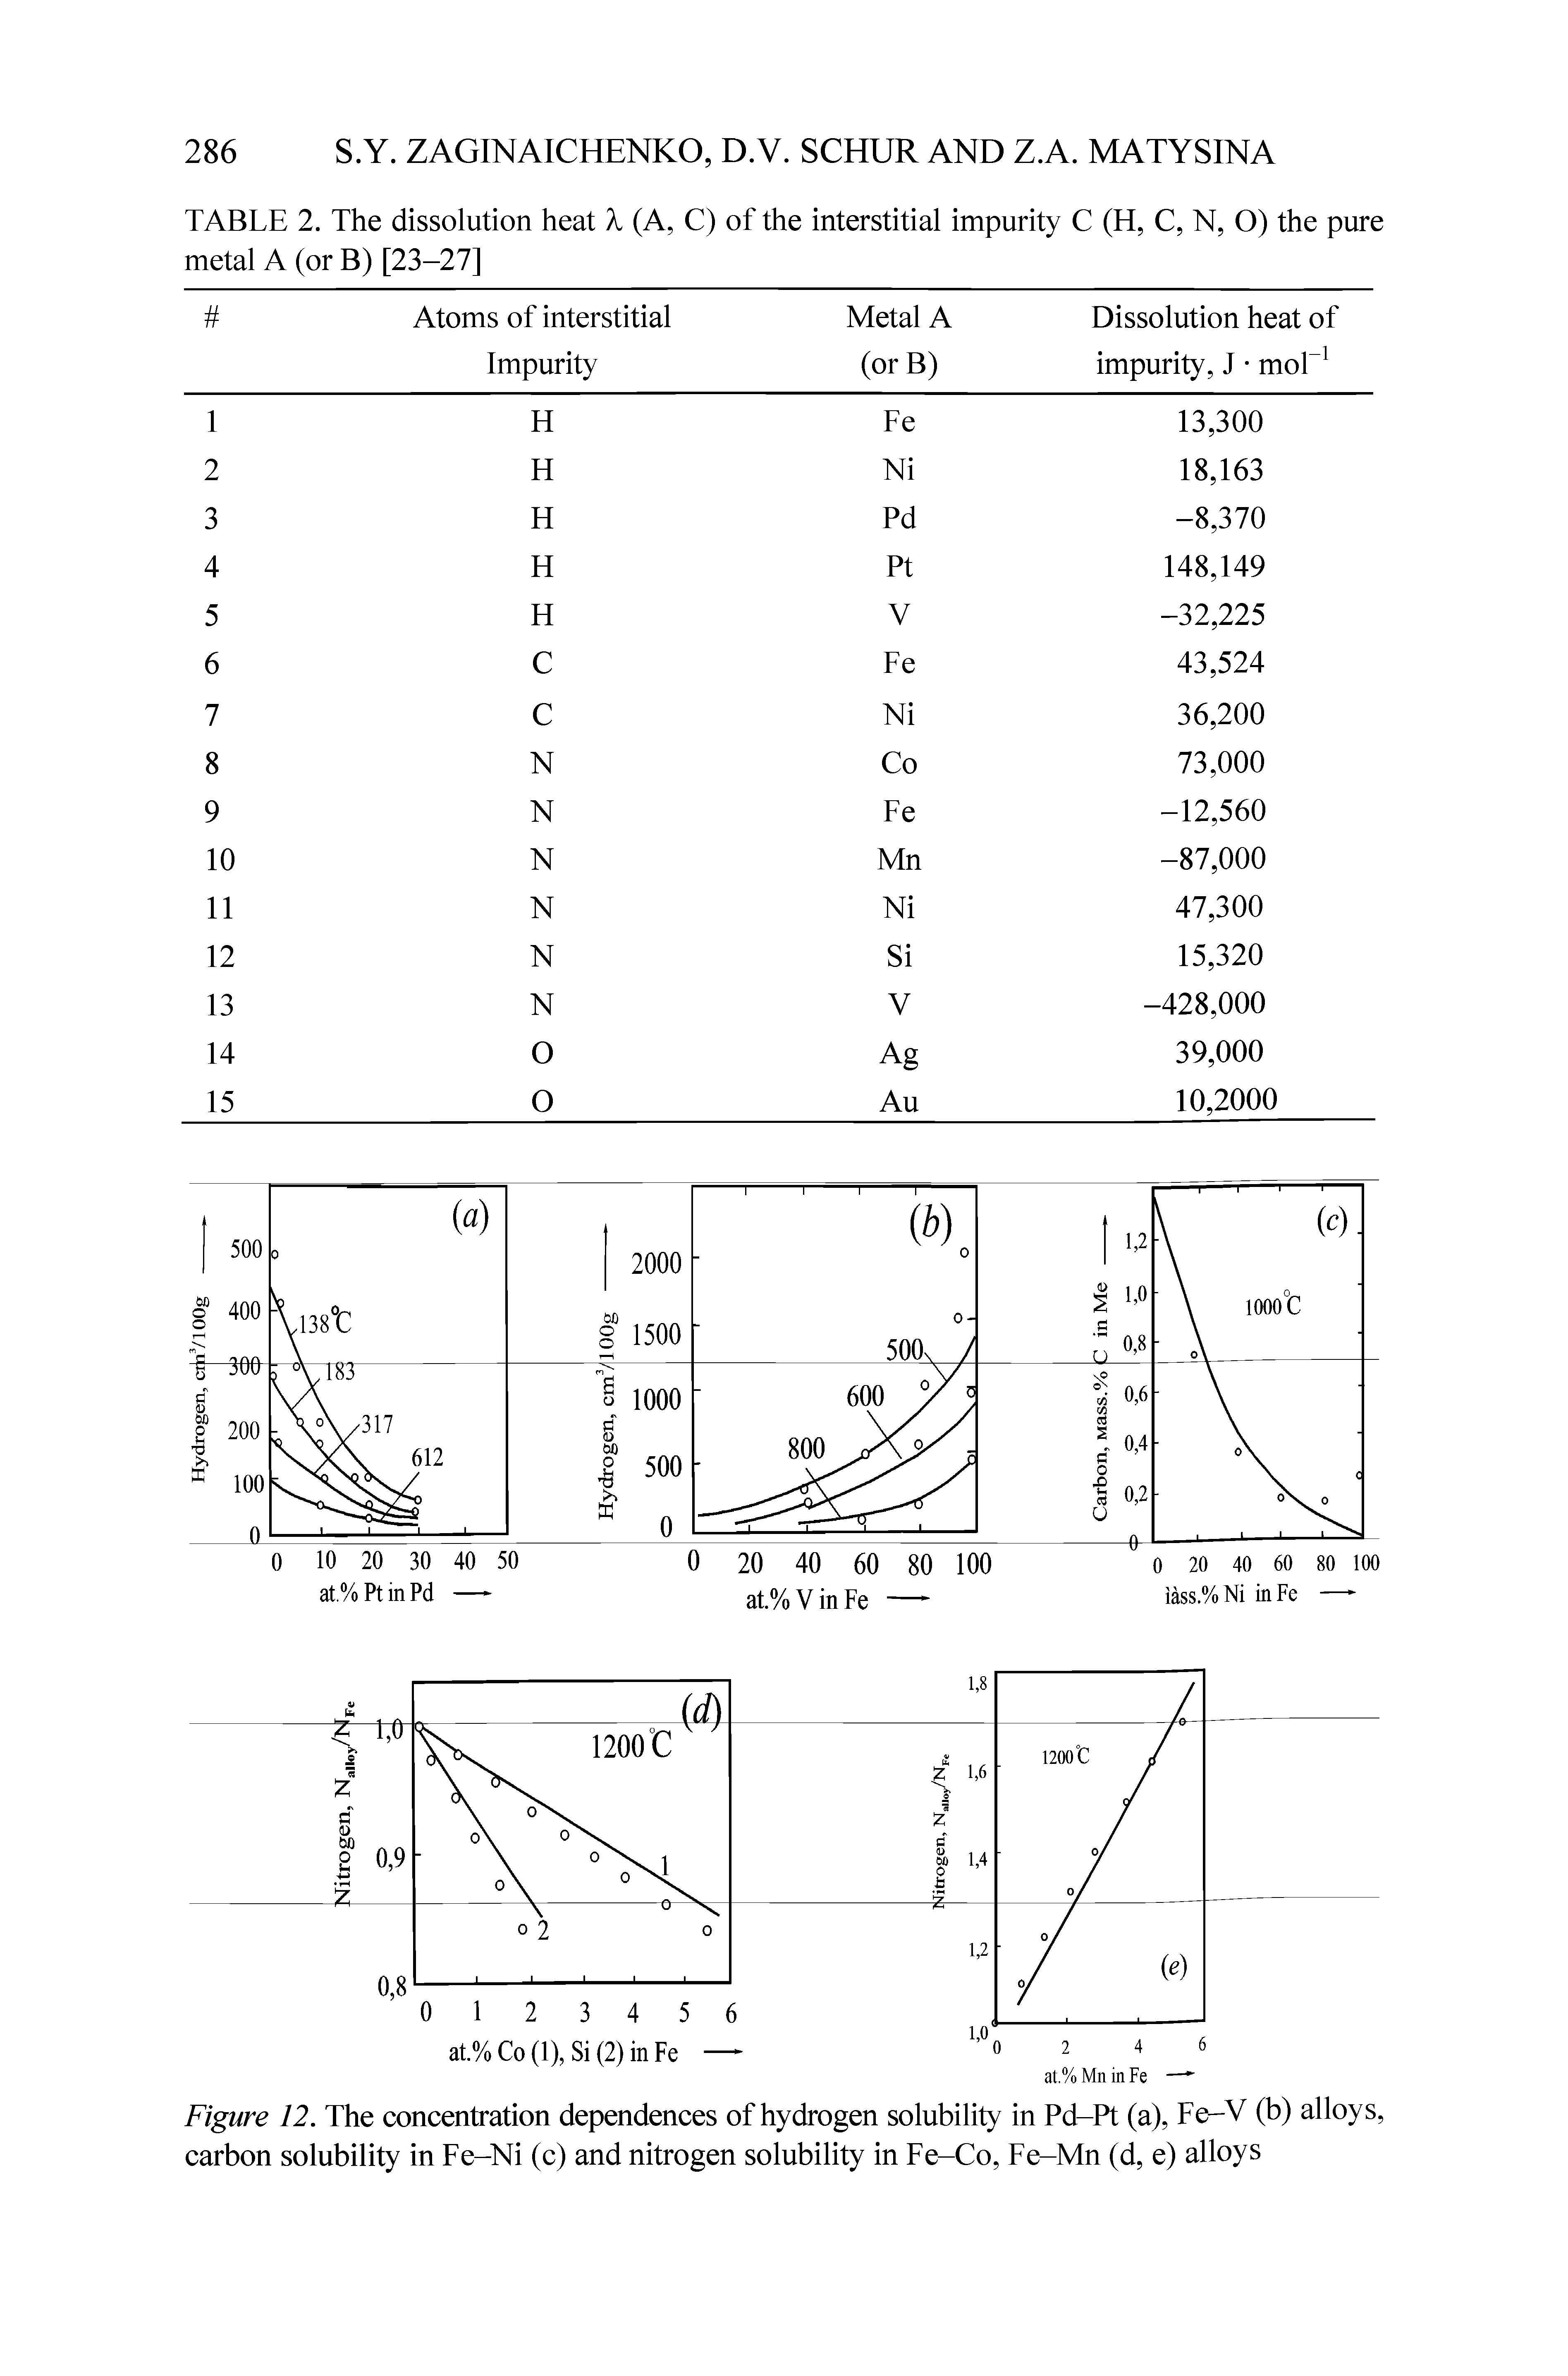 Figure 12. The concentration dependences of hydrogen solubility in Pd-Pt (a), Fe-V (b) alloys, carbon solubility in Fe-Ni (c) and nitrogen solubility in Fe-Co, Fe-Mn (d, e) alloys...